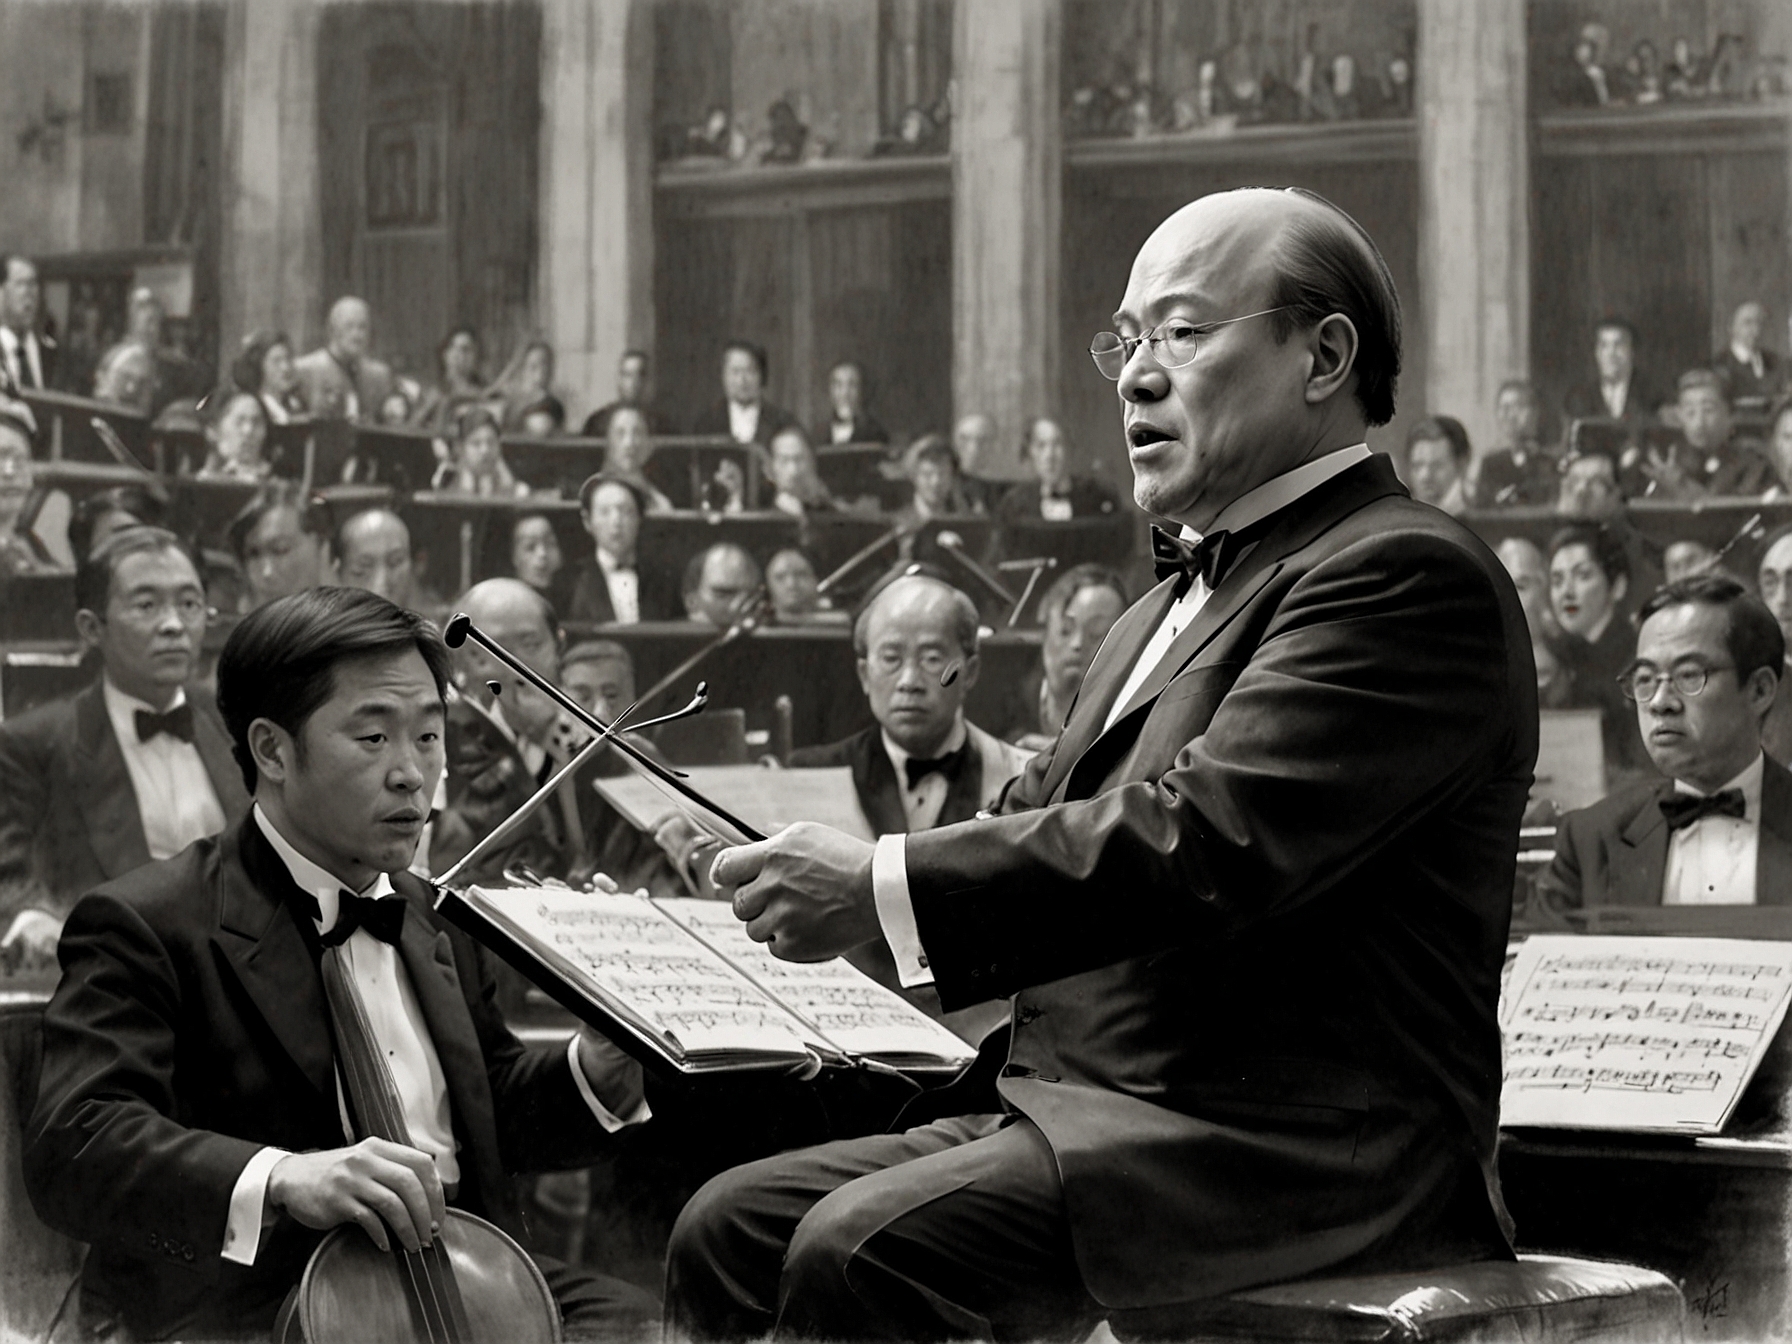 The Hong Kong Philharmonic Orchestra performing Wagner, demonstrating the skill and concentration required, as described by van Zweden in his analogy comparing the orchestra to a finely-tuned Ferrari.